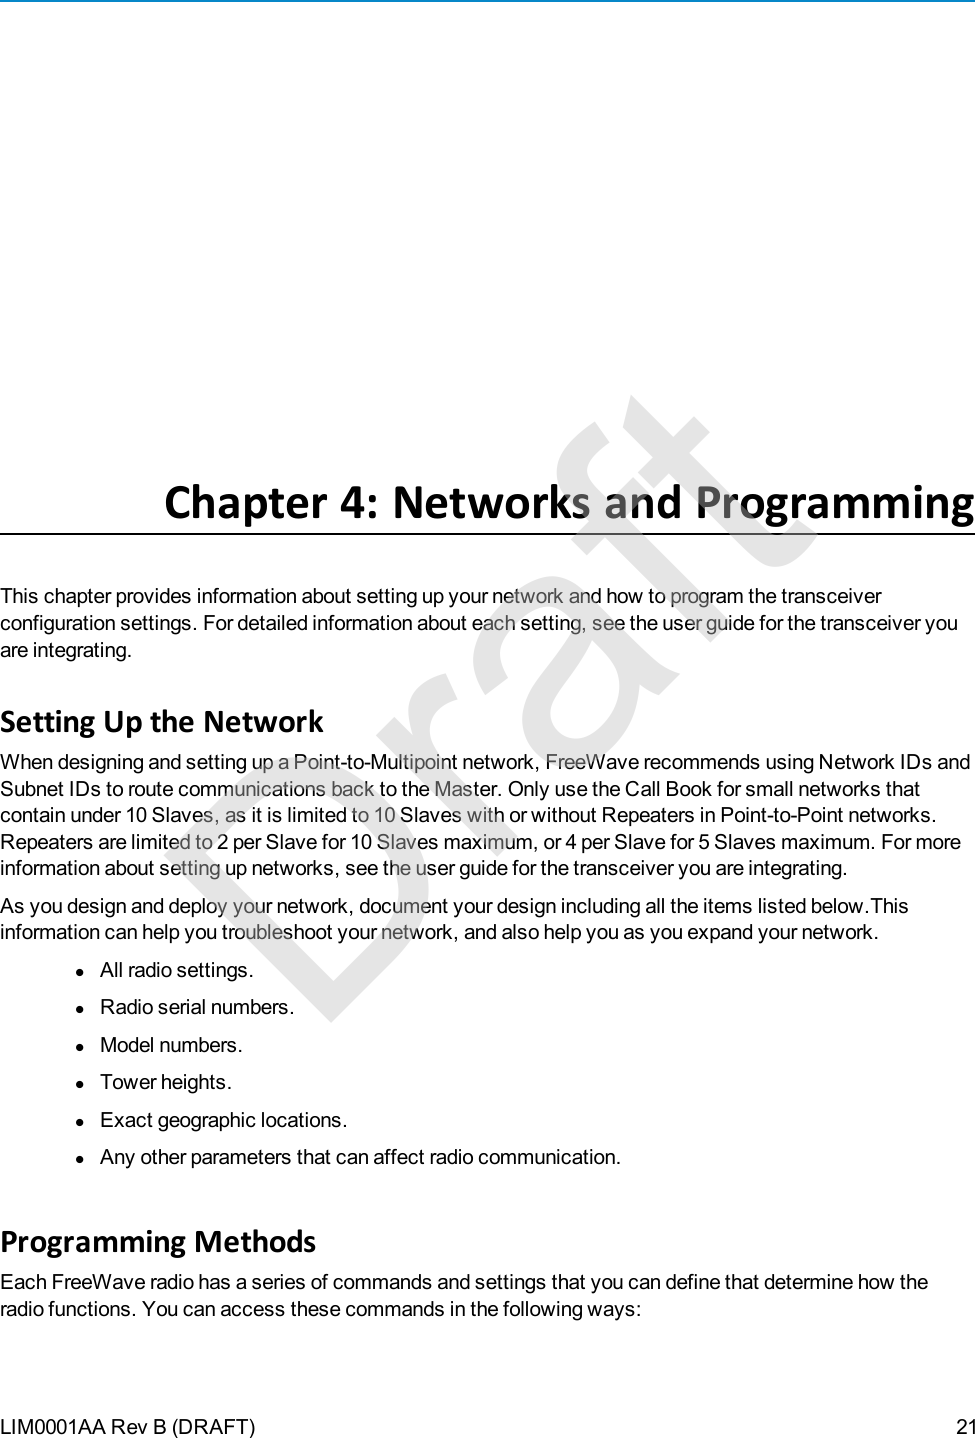 LIM0001AA Rev B (DRAFT)Chapter 4: Networks and ProgrammingThis chapter provides information about setting up your network and how to program the transceiverconfiguration settings. For detailed information about each setting, see the user guide for the transceiver youare integrating.Setting Up the NetworkWhen designing and setting up a Point-to-Multipoint network, FreeWave recommends using Network IDs andSubnet IDs to route communications back to the Master. Only use the Call Book for small networks thatcontain under 10 Slaves, as it is limited to 10 Slaves with or without Repeaters in Point-to-Point networks.Repeaters are limited to 2 per Slave for 10 Slaves maximum, or 4 per Slave for 5 Slaves maximum. For moreinformation about setting up networks, see the user guide for the transceiver you are integrating.As you design and deploy your network, document your design including all theitems listed below.Thisinformation can help you troubleshoot your network, and also help you as you expand your network.lAll radio settings.lRadio serial numbers.lModel numbers.lTower heights.lExact geographic locations.lAny other parameters that can affect radio communication.Programming MethodsEach FreeWave radio has a series of commands and settings that you can define that determine how theradio functions. You can access these commands in the following ways:21Draft